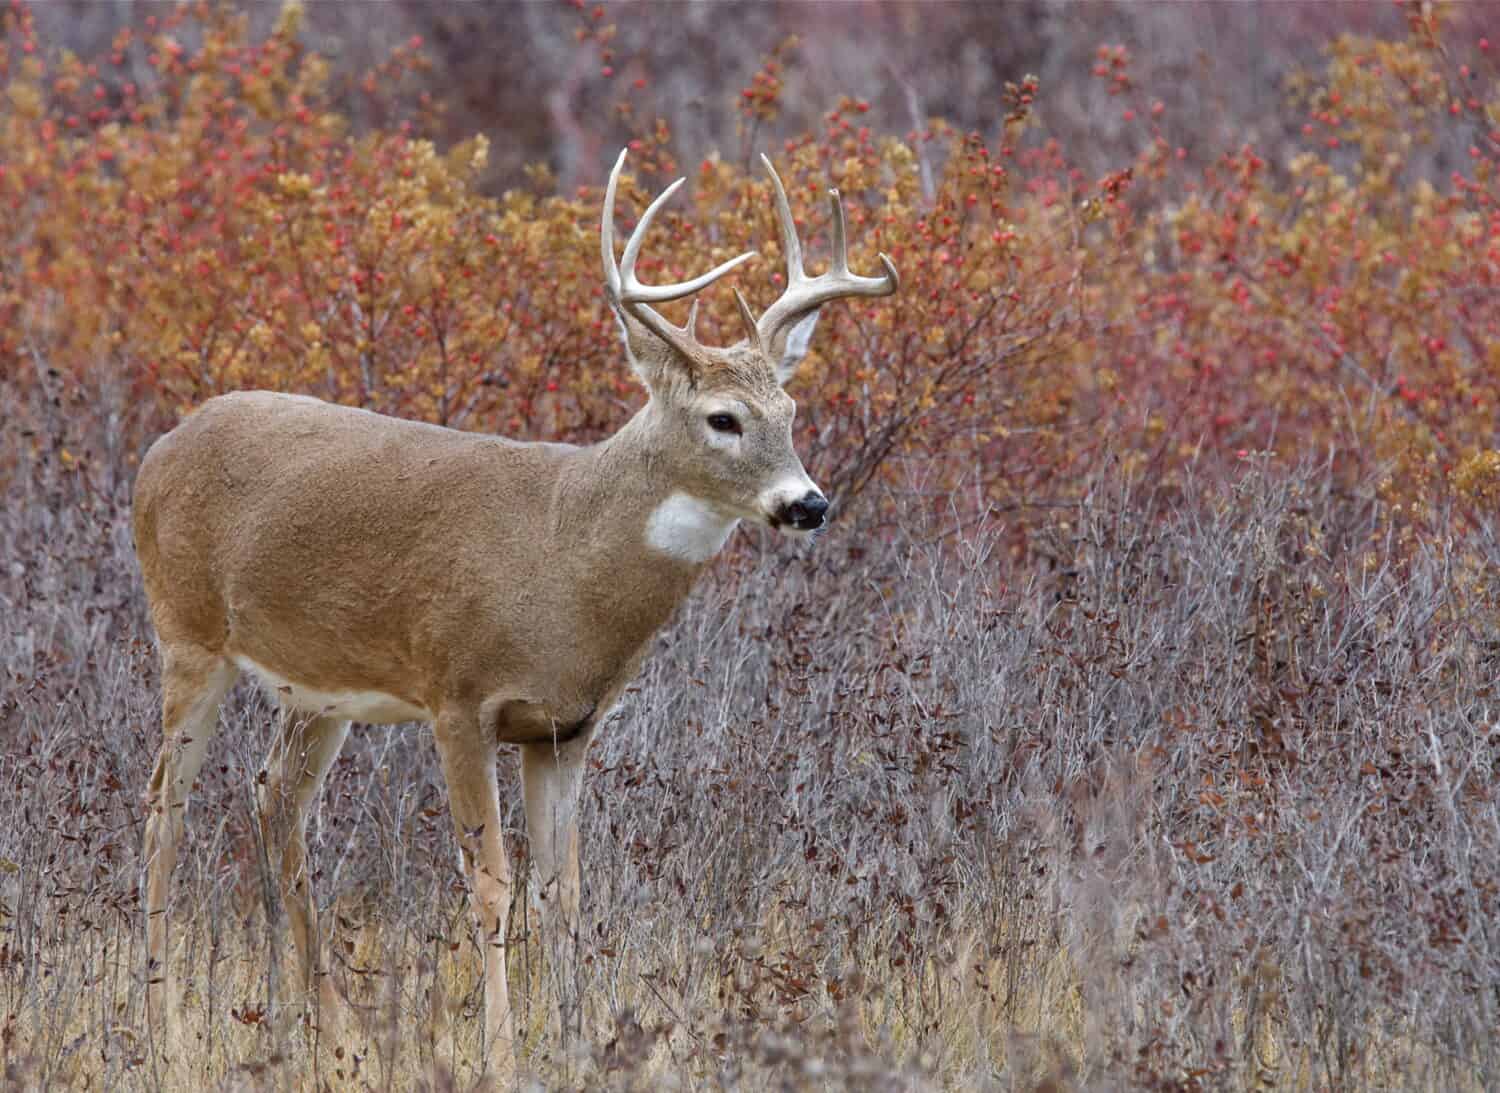 White Tail Buck Deer stag in autumn landscape, fall colors; midwest midwestern big game deer hunting season